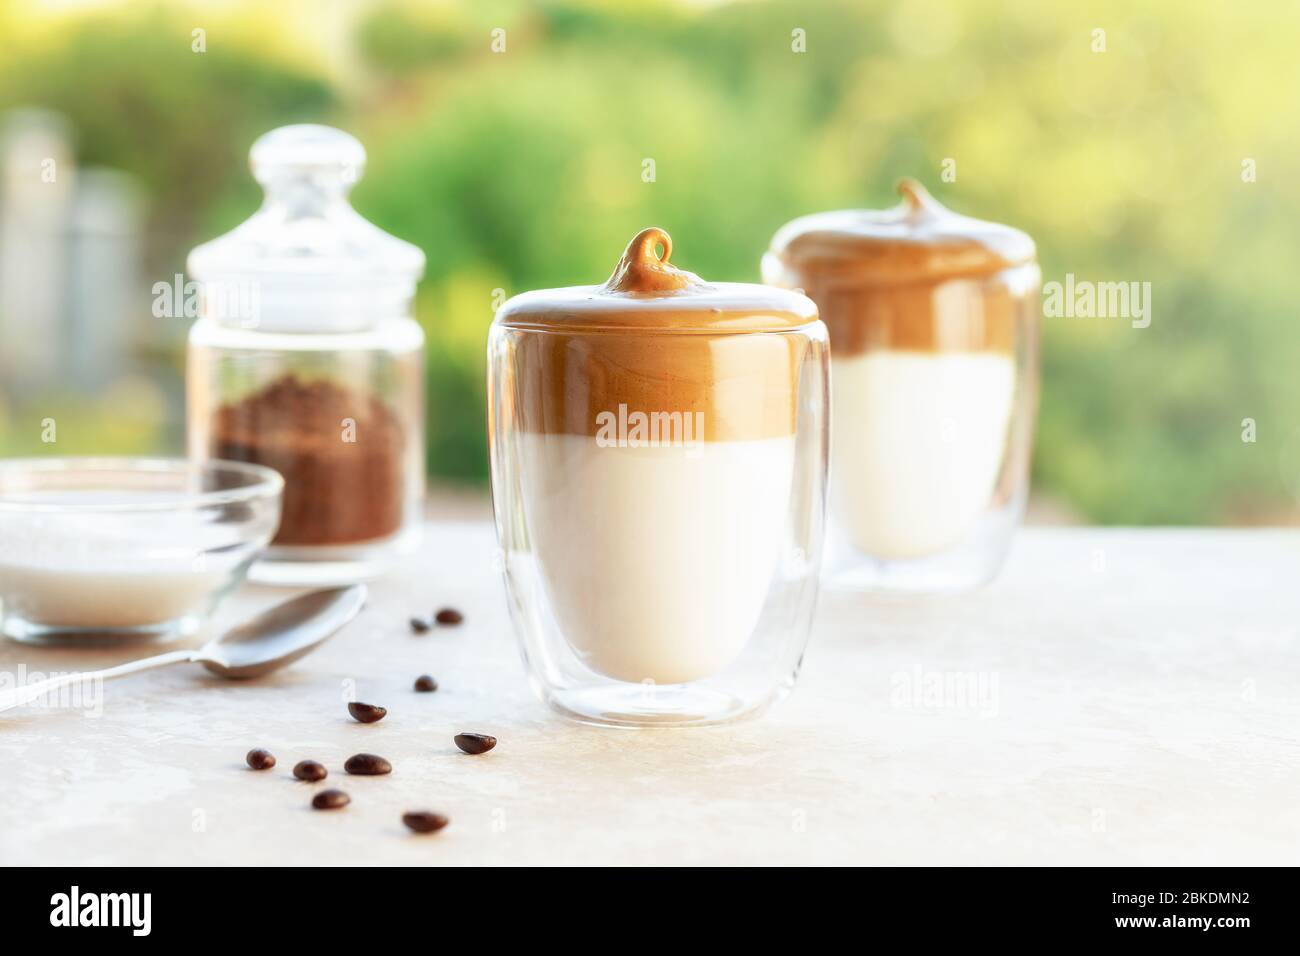 Tasty homemade Dalgona coffee in glass cup with ingredients, coffee and suger on a table on green background. Recipe popular Korean drink latte with f Stock Photo